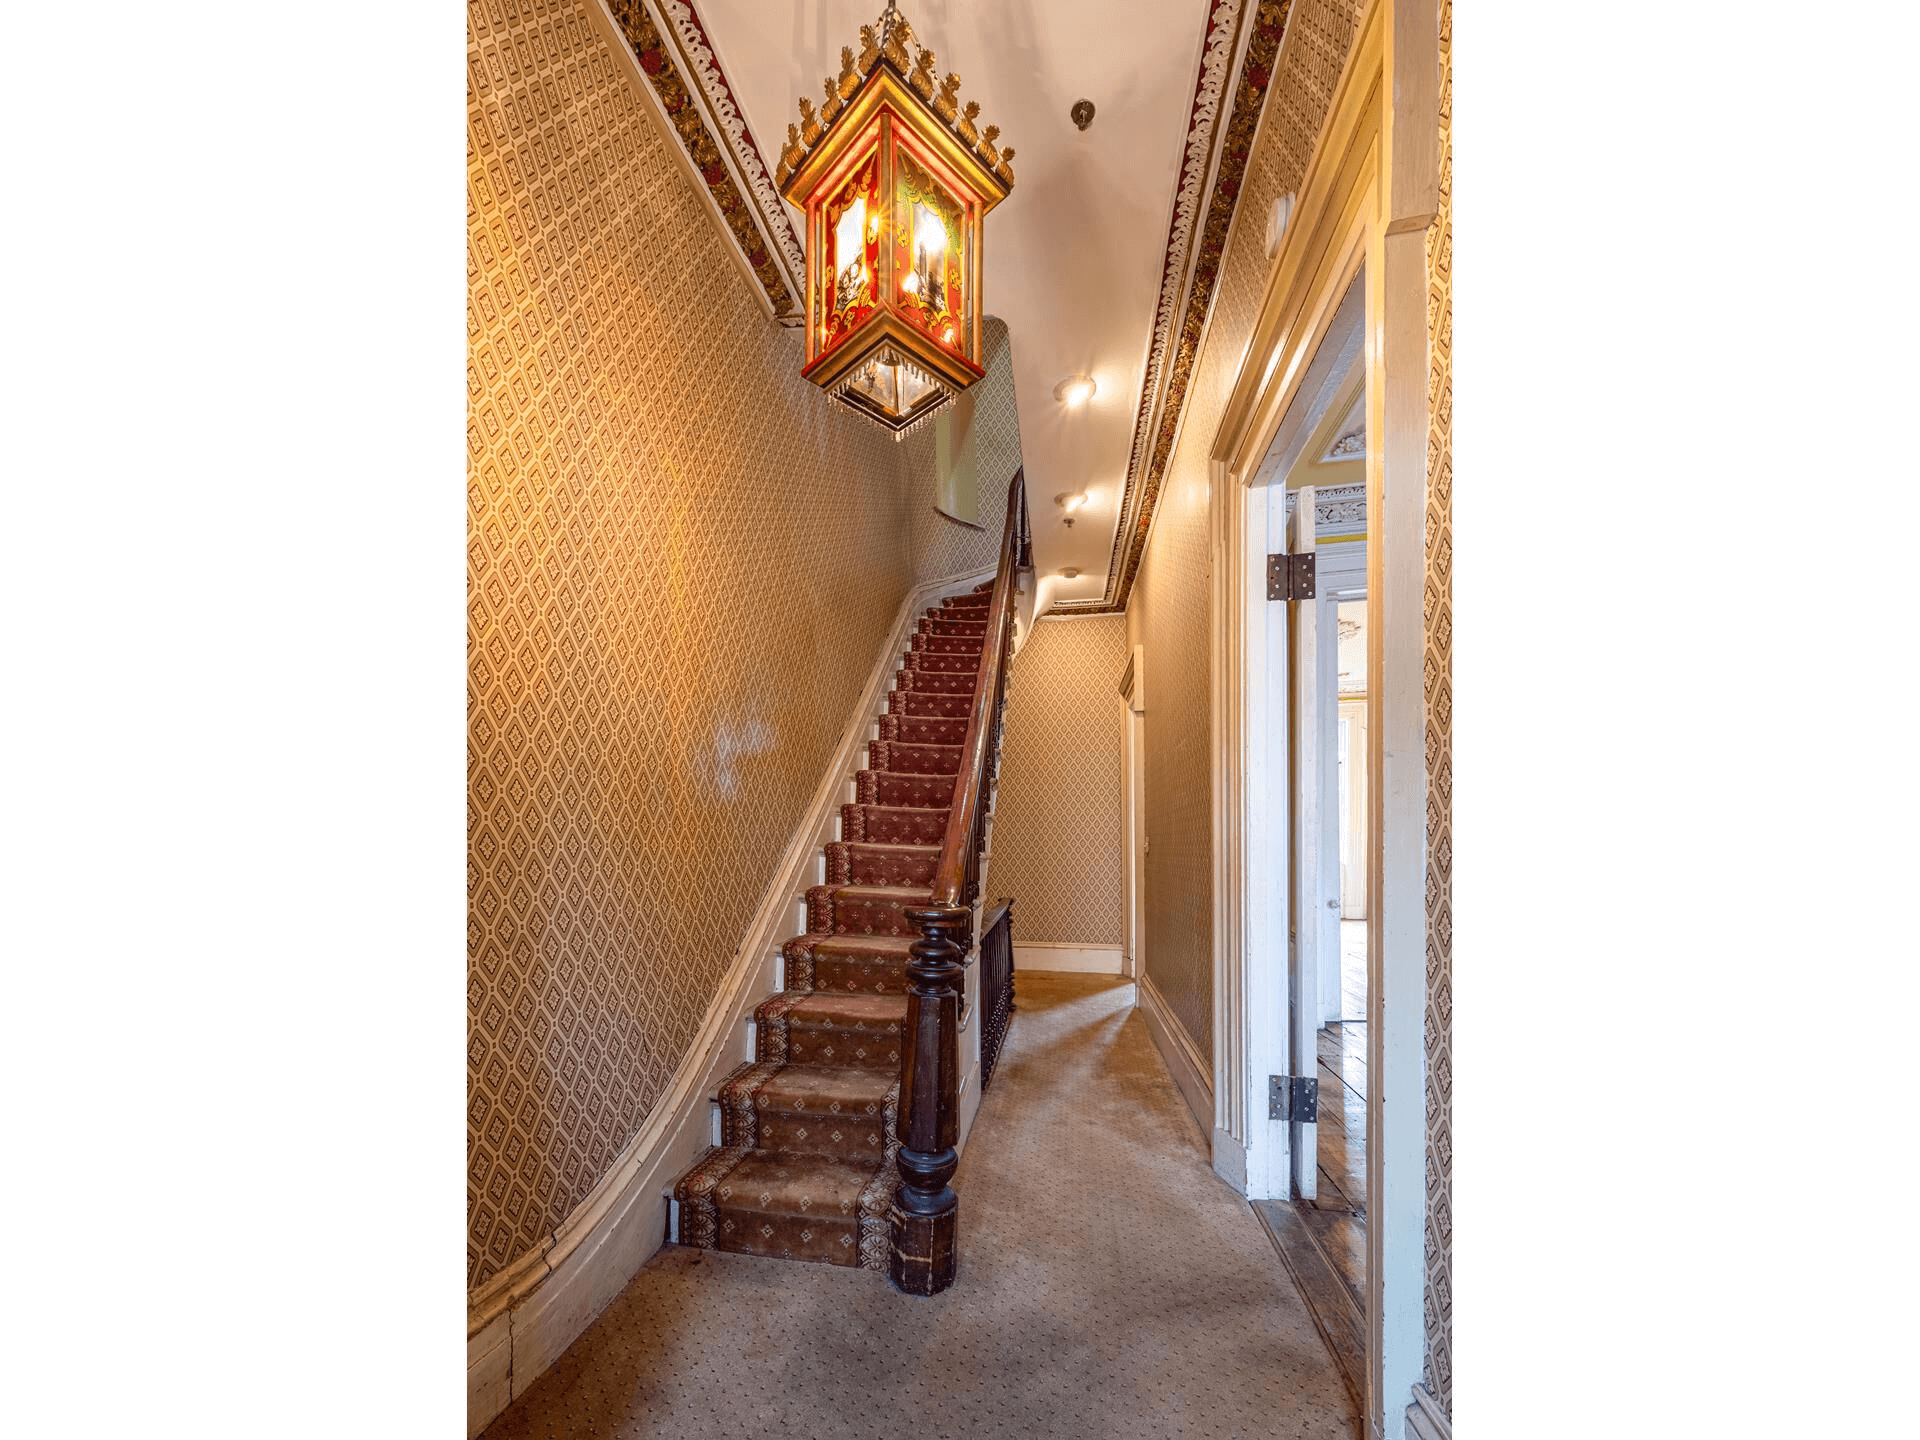 entry hall with wallpaper, carpet and original stair